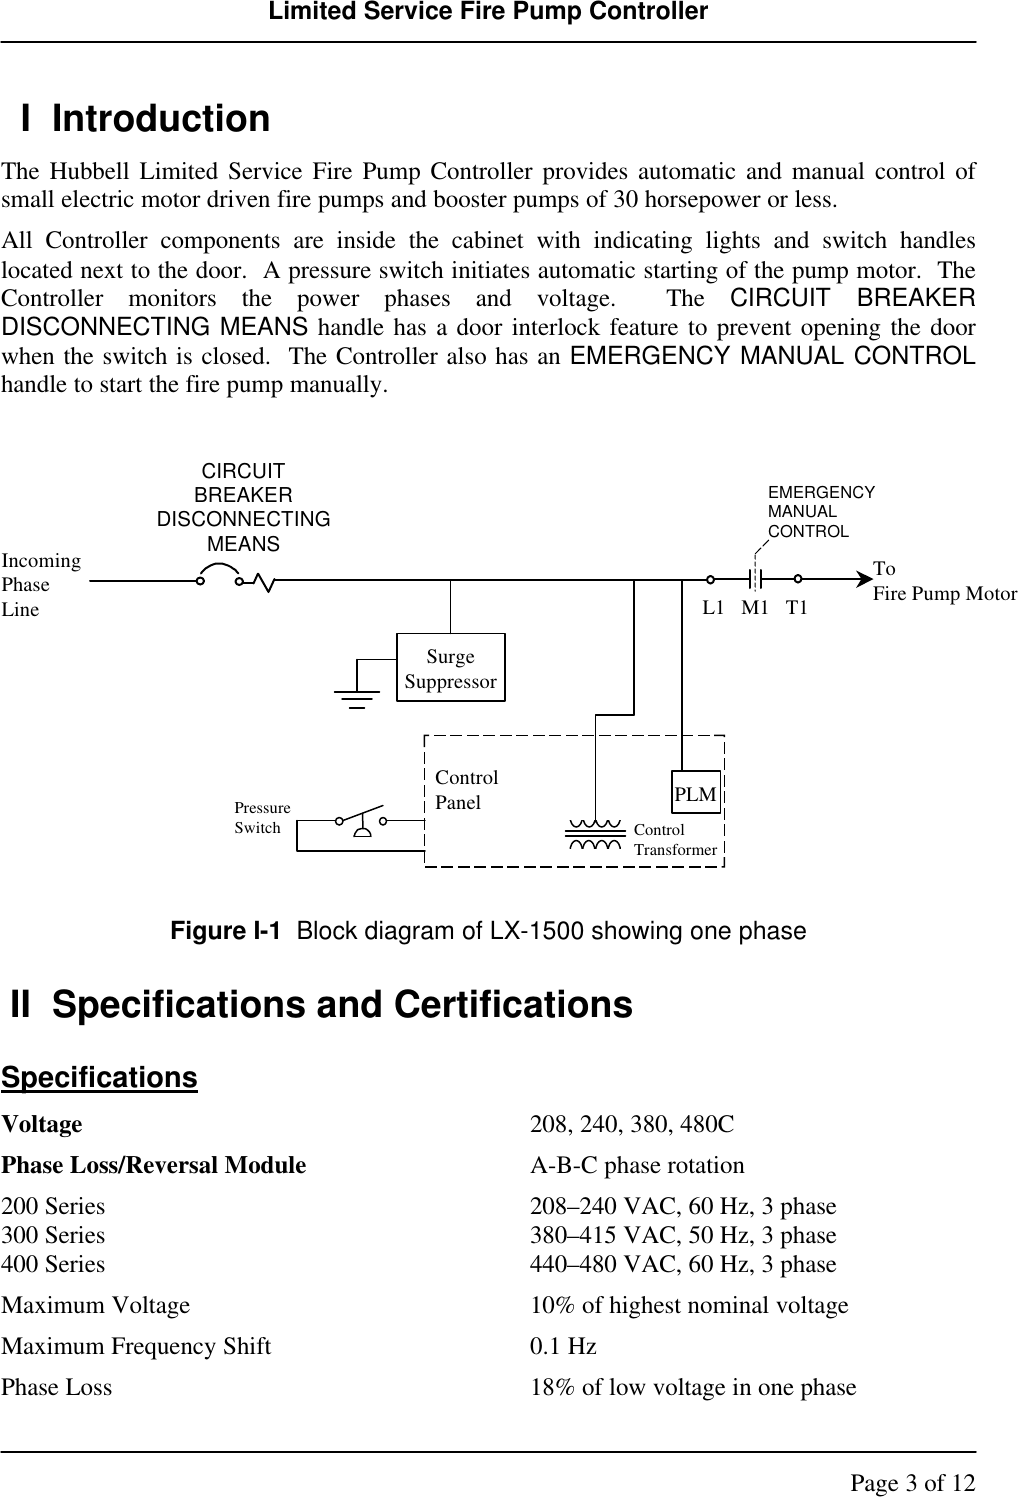 Page 3 of 12 - Hubbell Hubbell-Fire-Pump-Controller-Lx-1500-Users-Manual- LX-1500 Manual  Hubbell-fire-pump-controller-lx-1500-users-manual